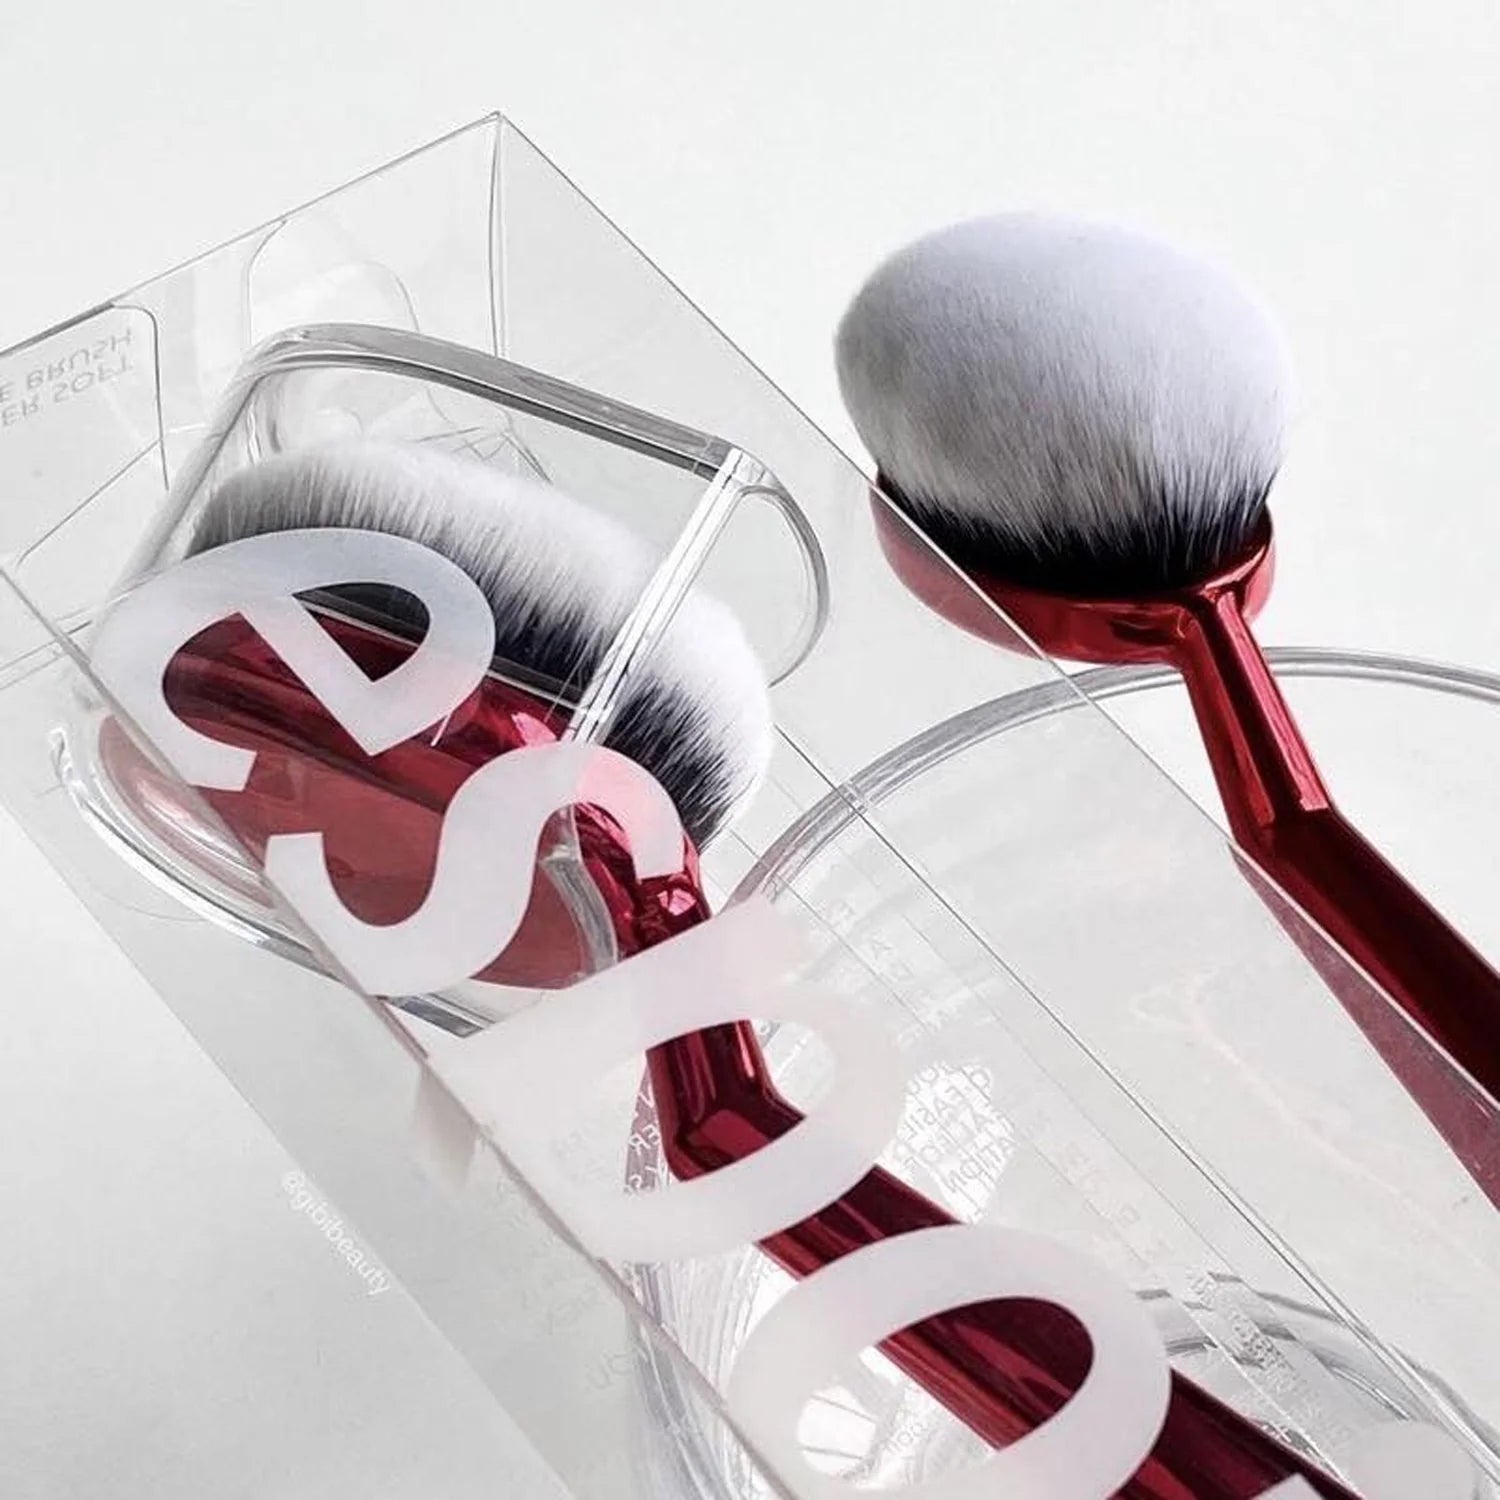 Pamper your skin with the espoir Super Soft Face Brush for a spa-like experience.